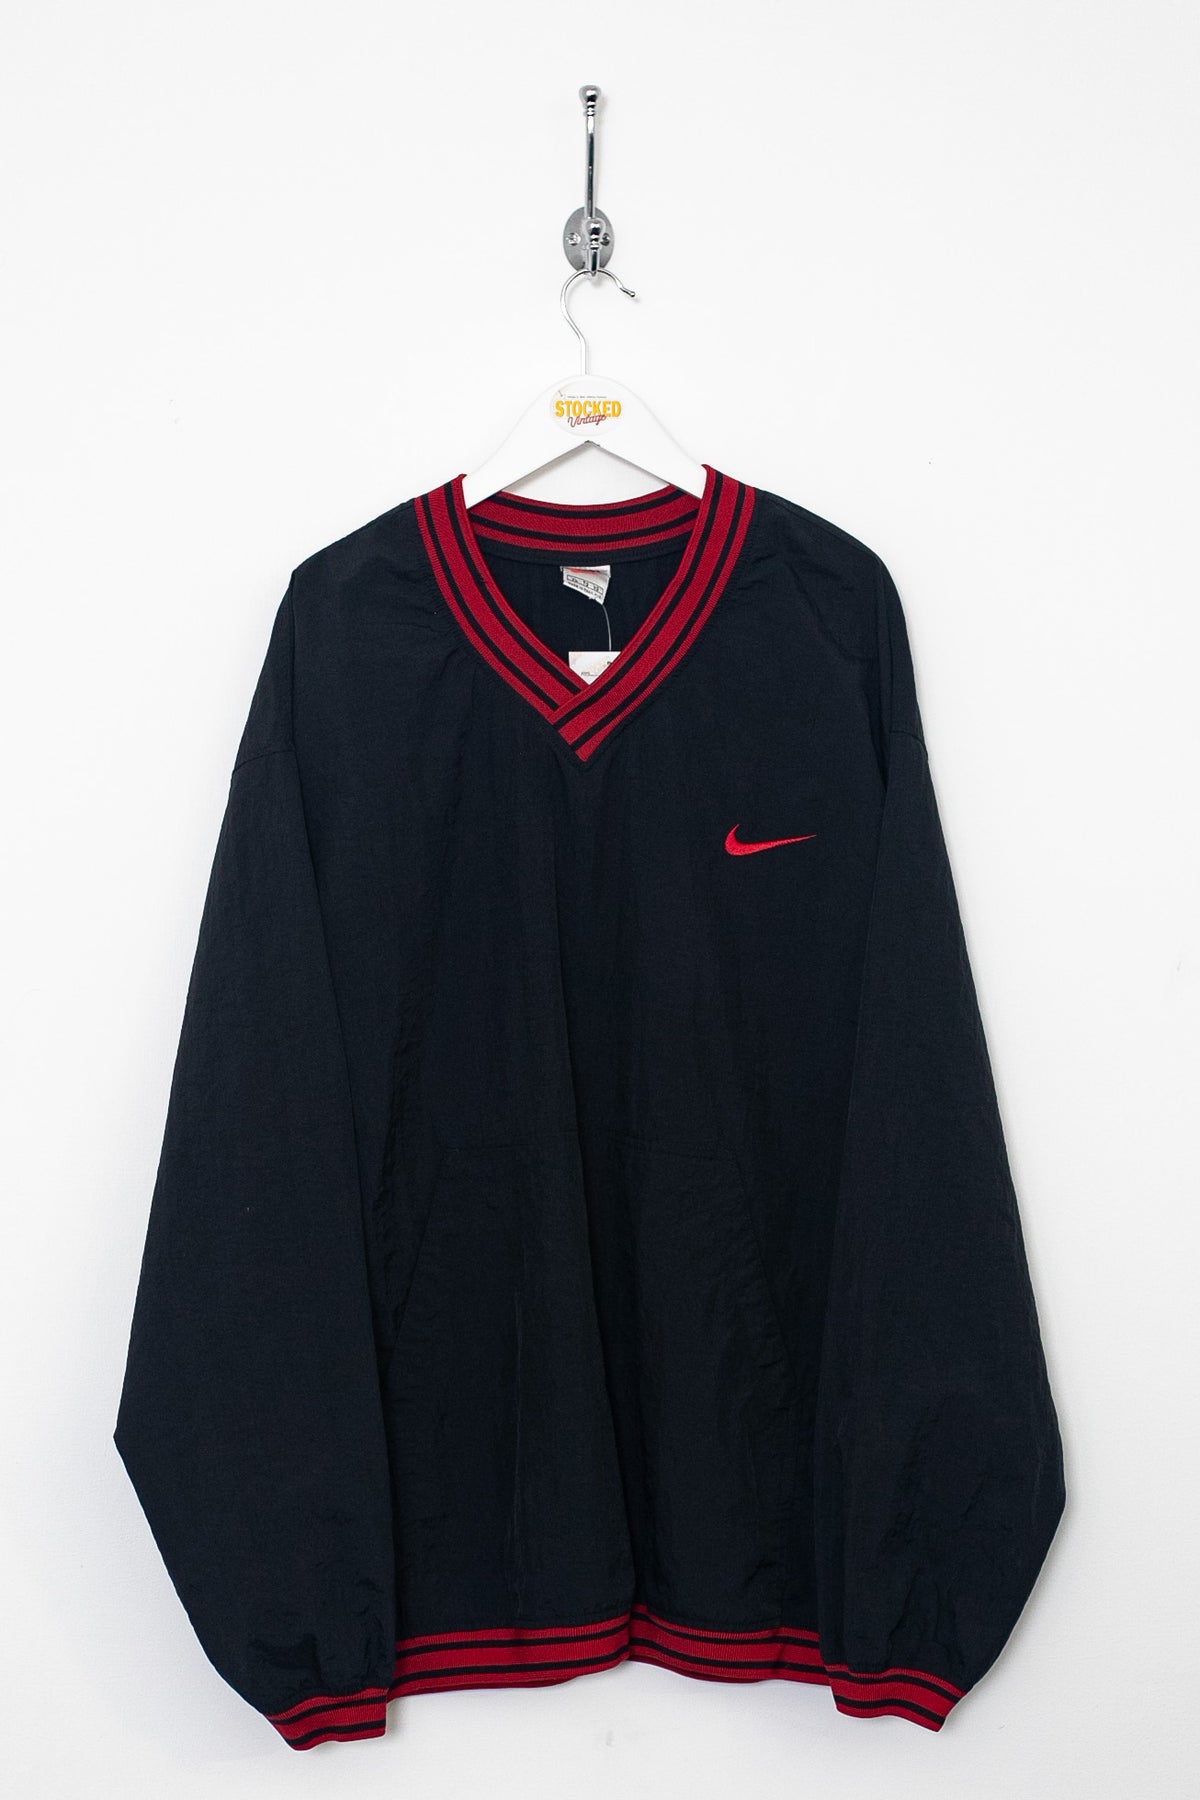 90s Nike Pullover (XL)